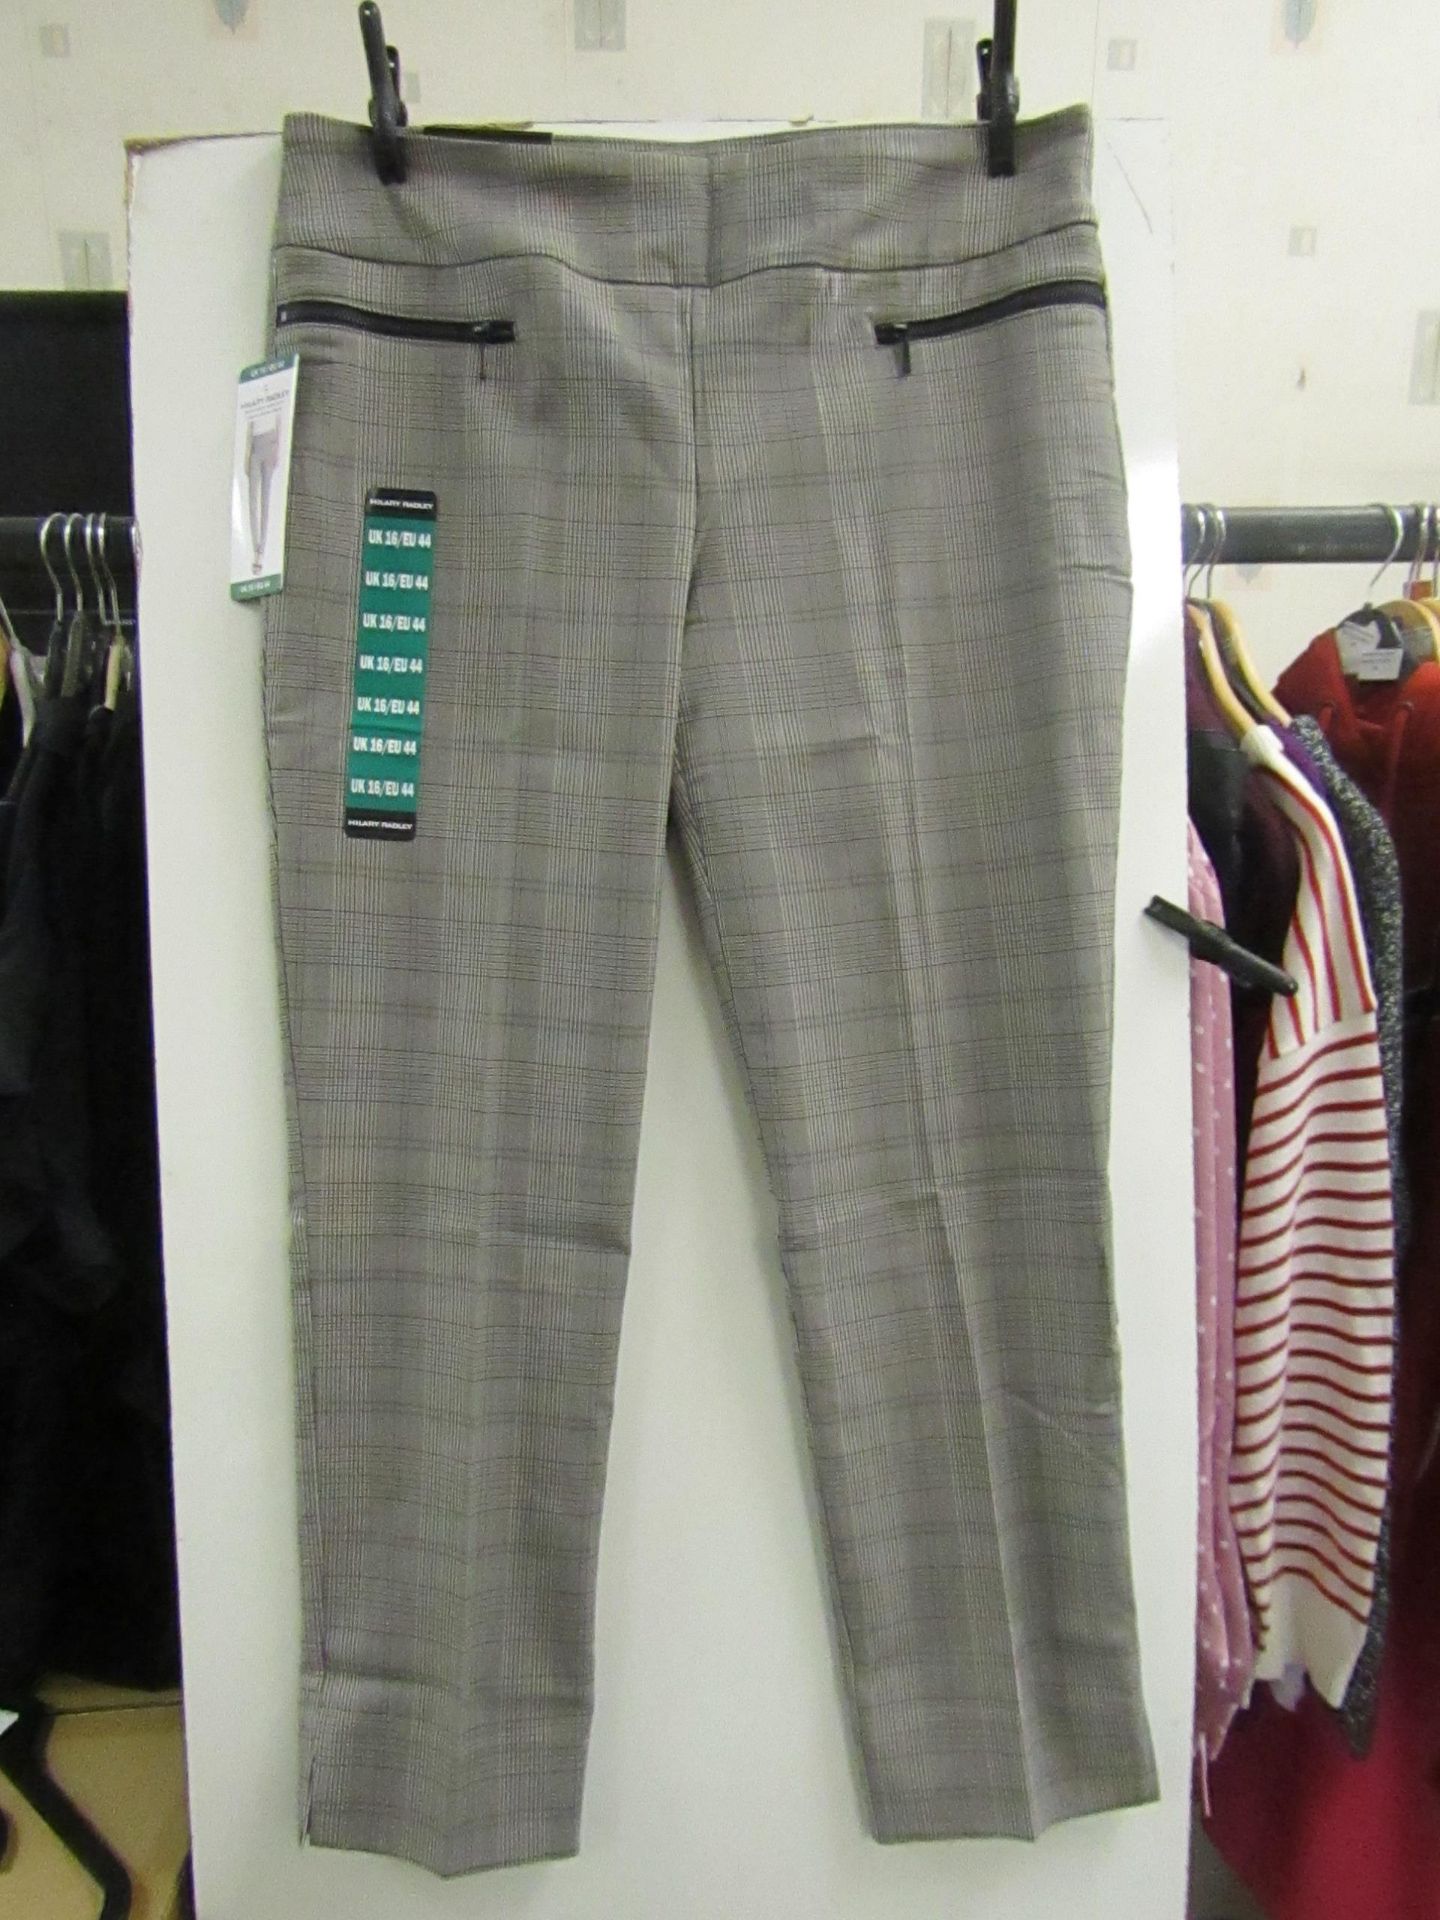 Pair of hilary radley ladies Pull on Trousers with Cigarette leg, new size 16